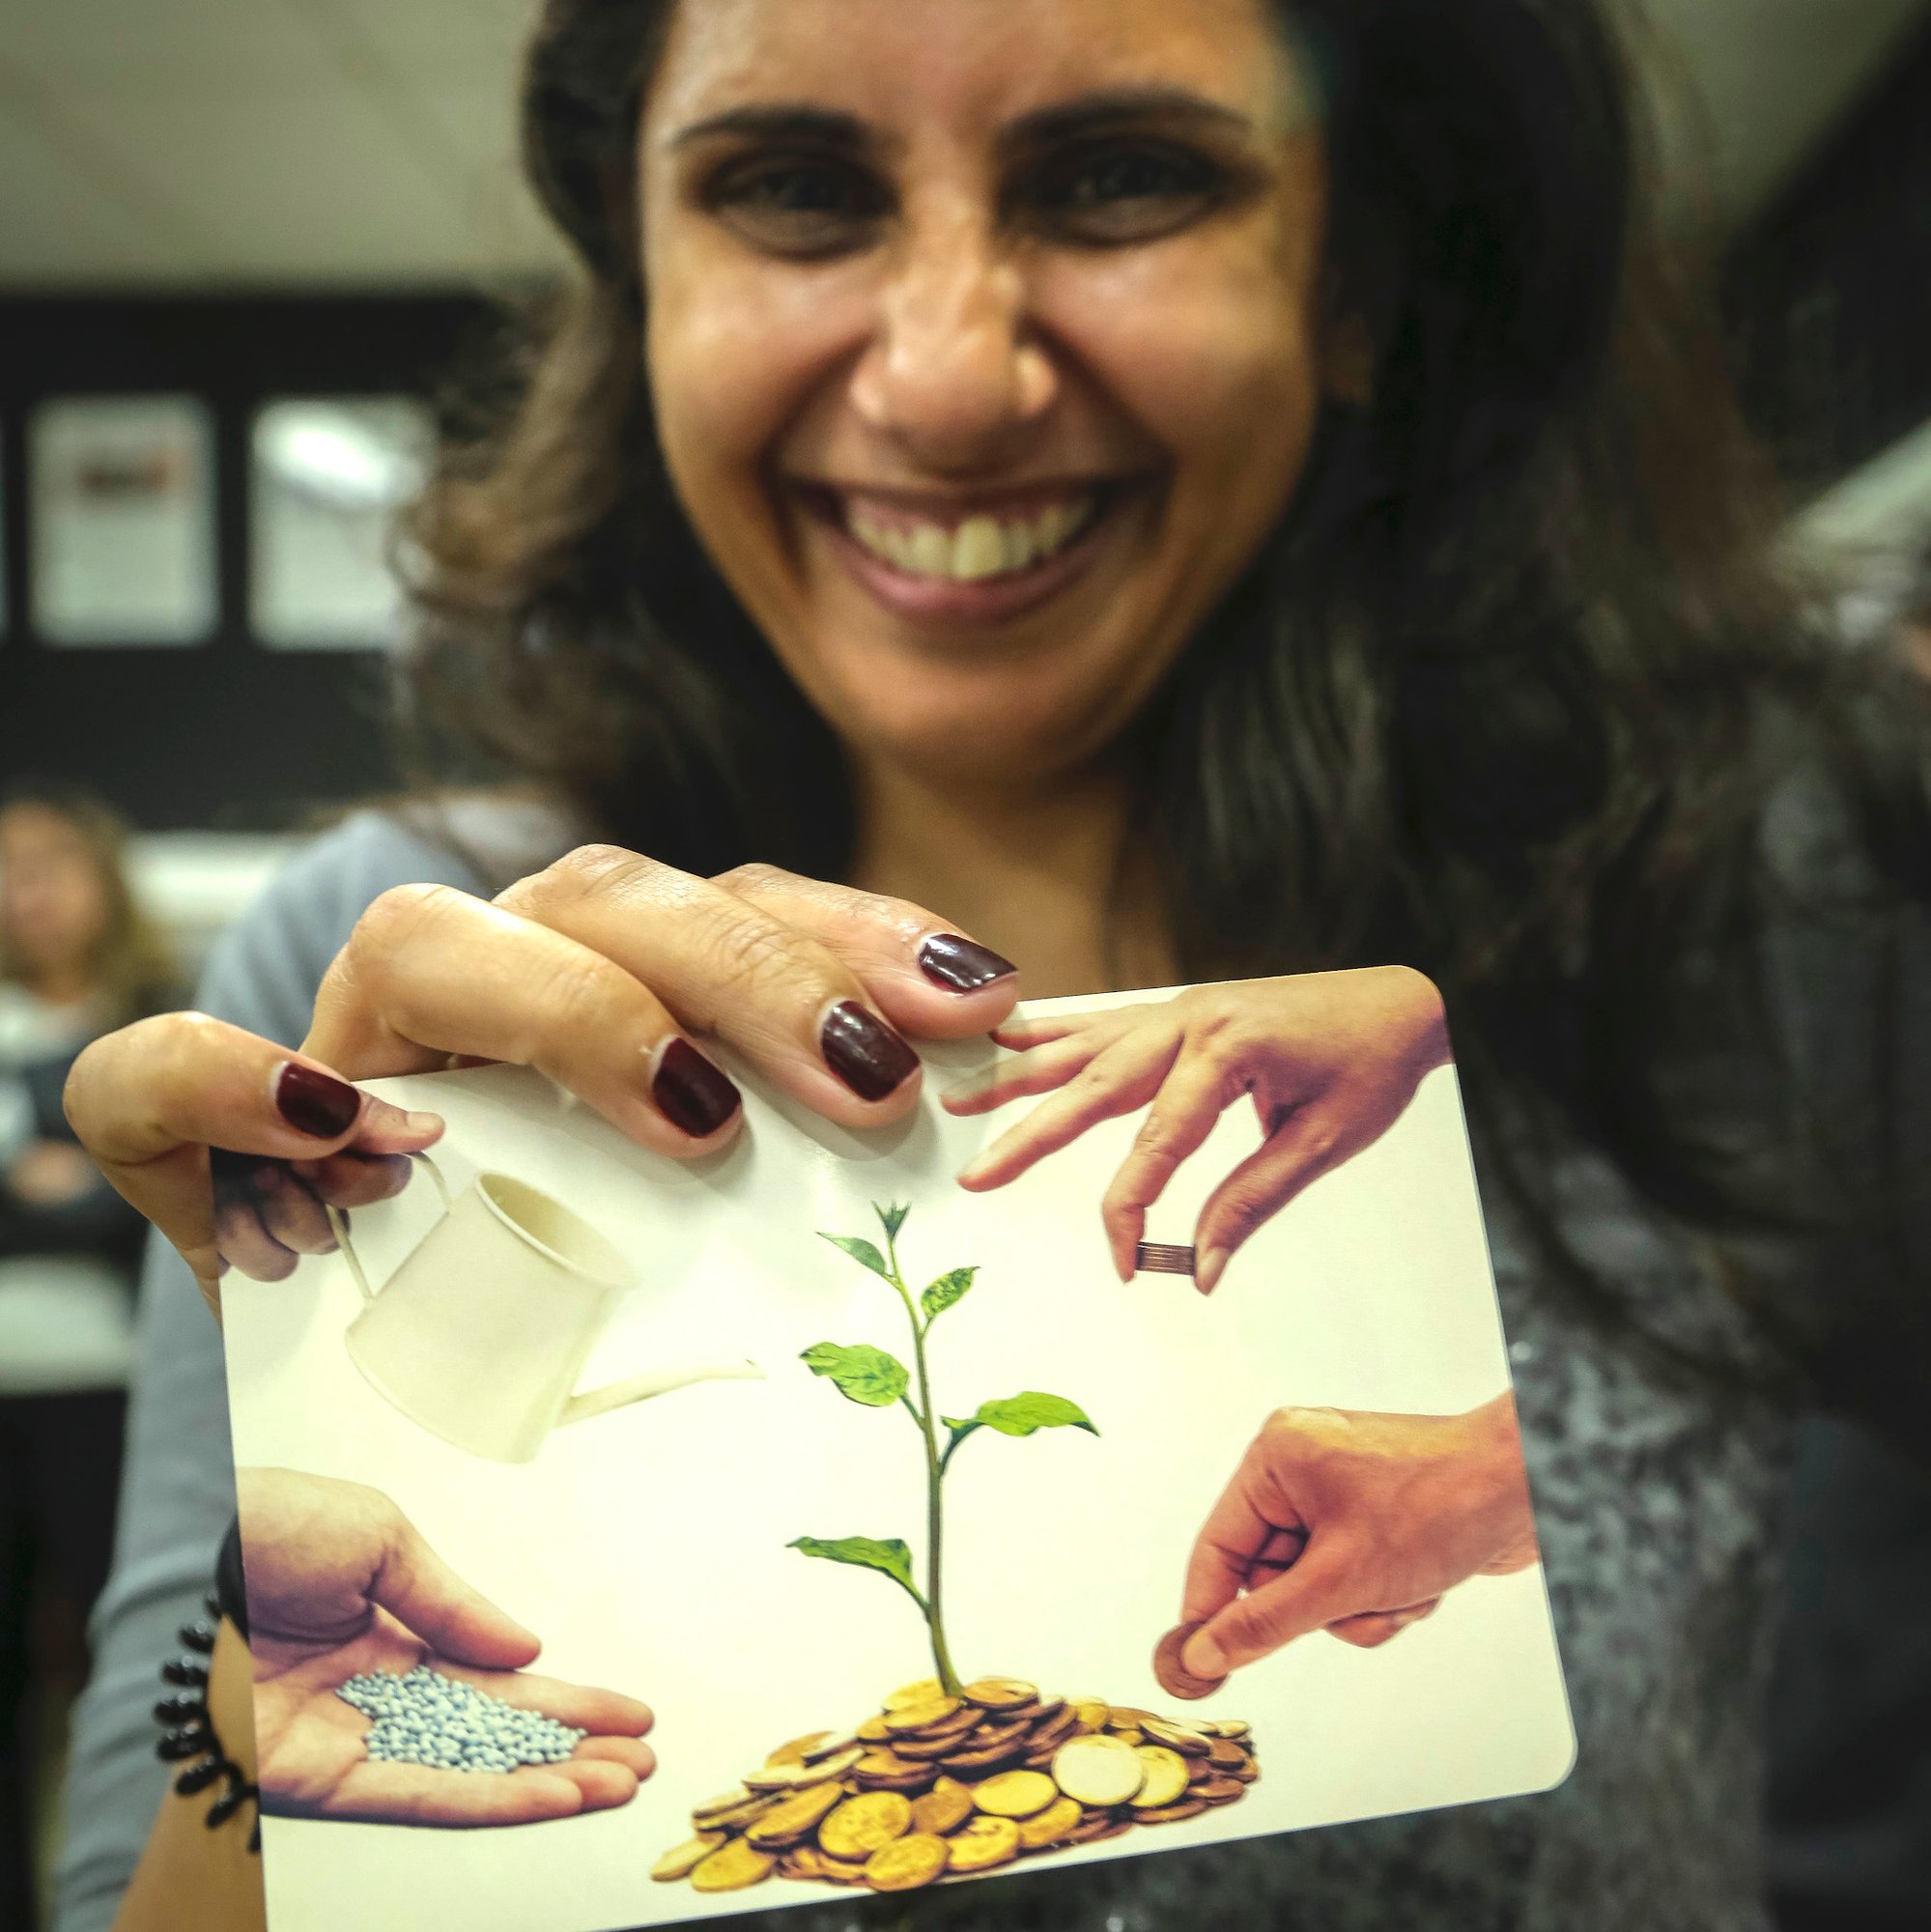 A woman holds a card with the image of a seedling growing out of a pile of coins